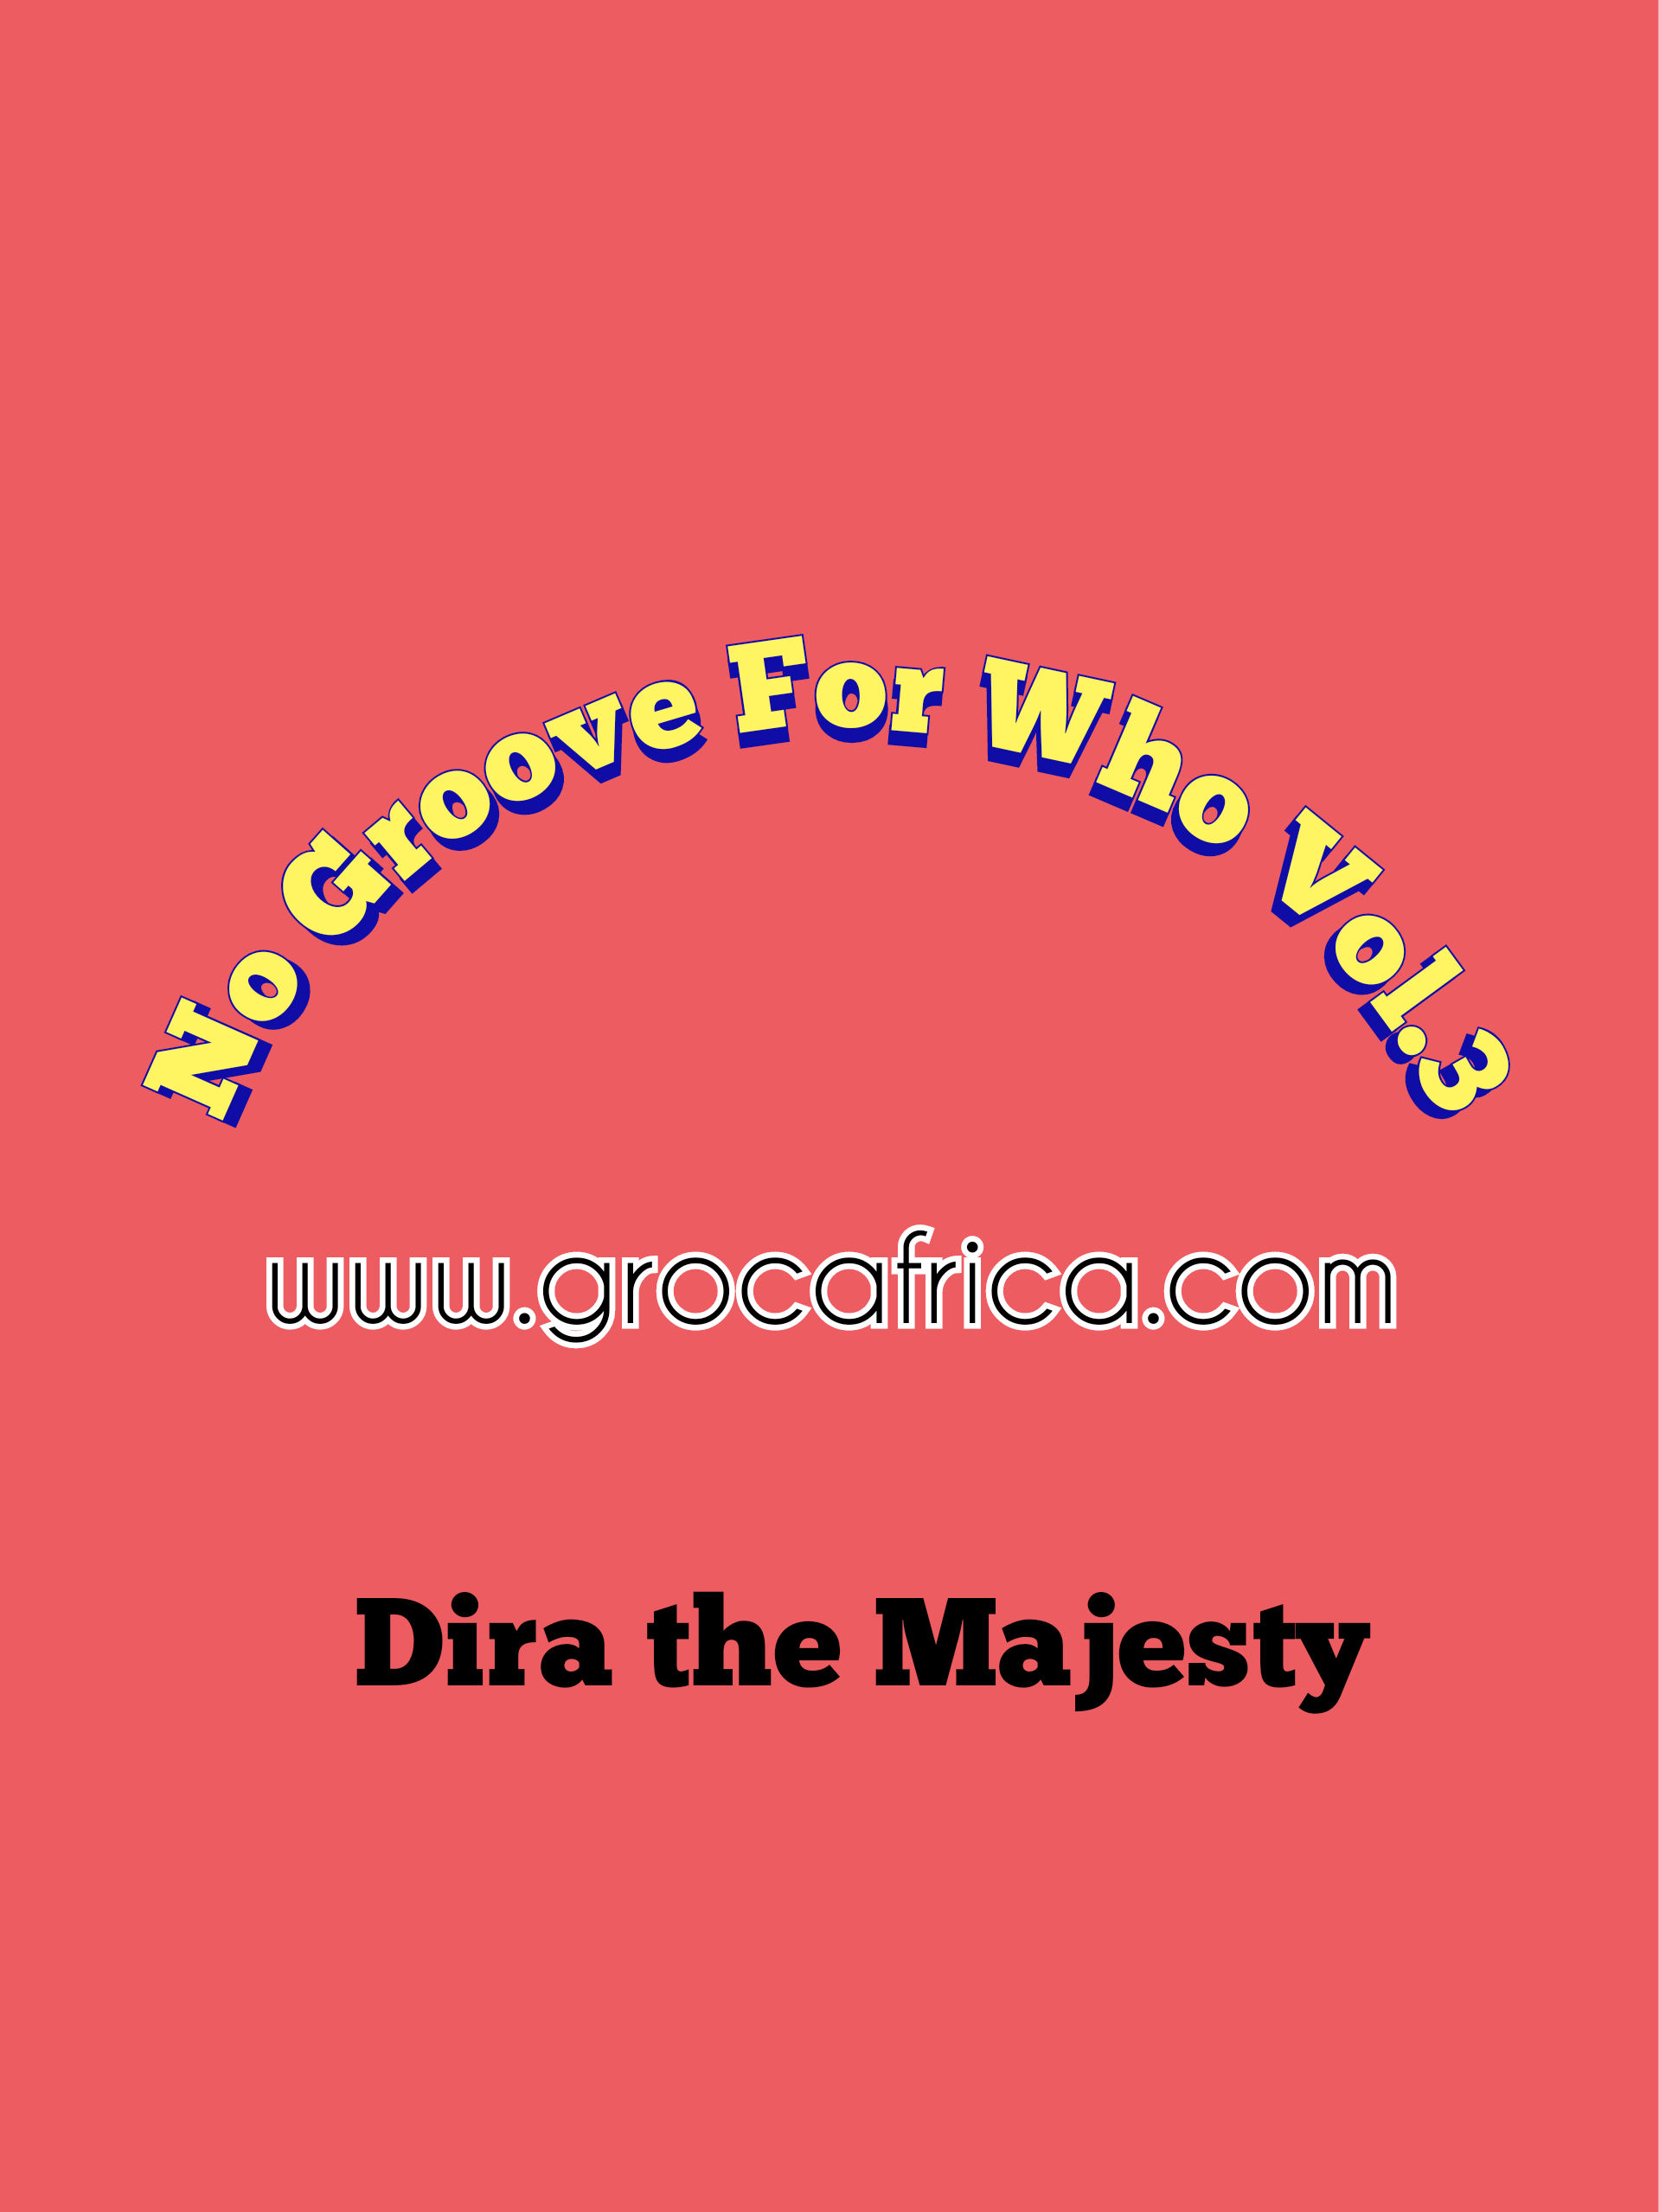 No Groove For Who Vol.3 Mix Image